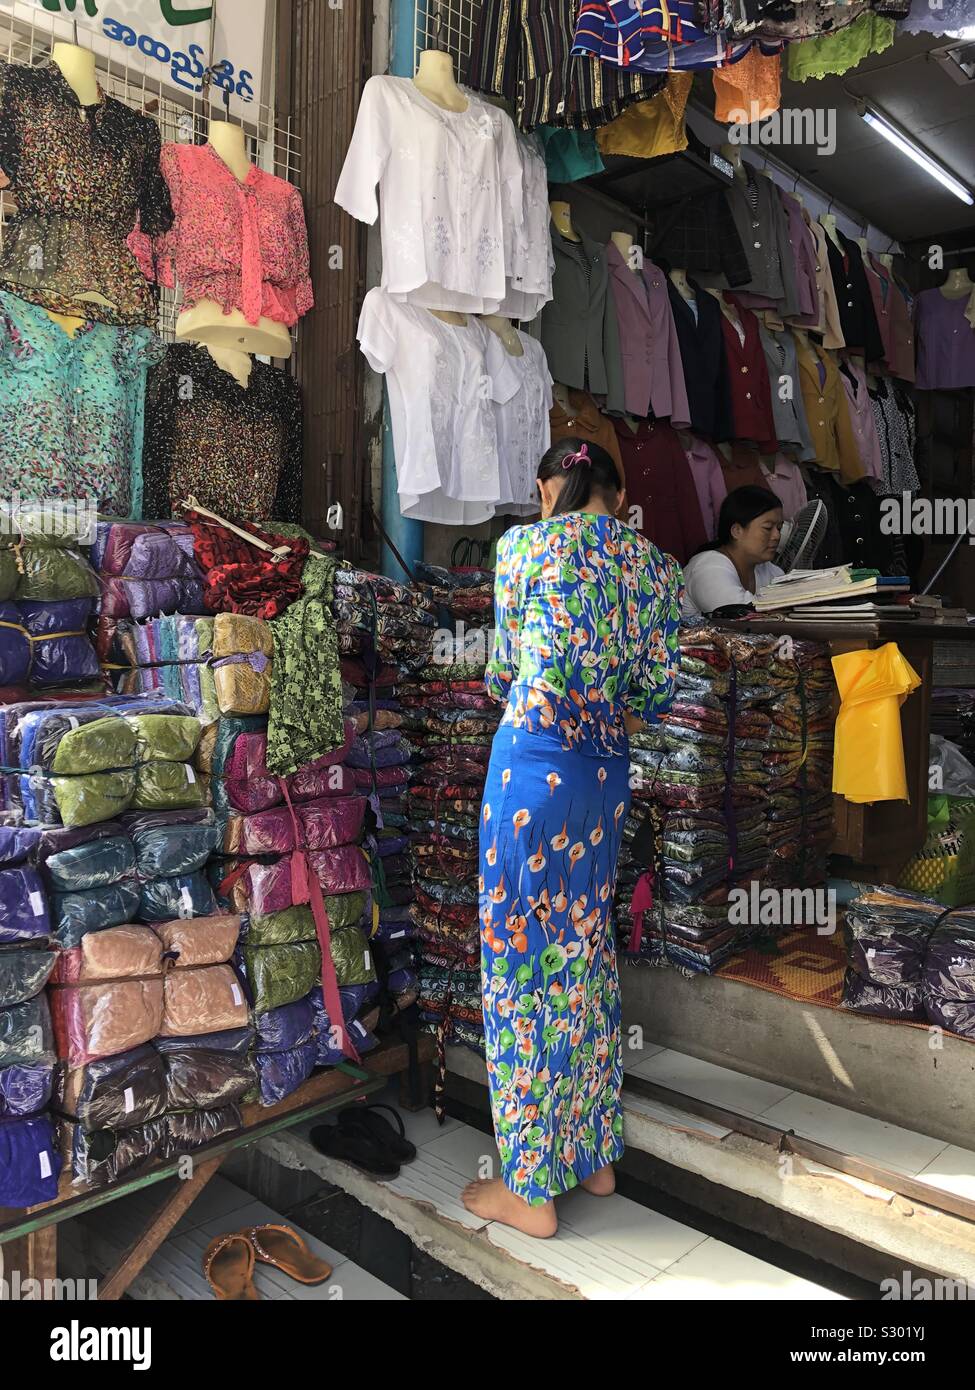 Clothing choices at a local market in Mandalay, Myanmar. Stock Photo